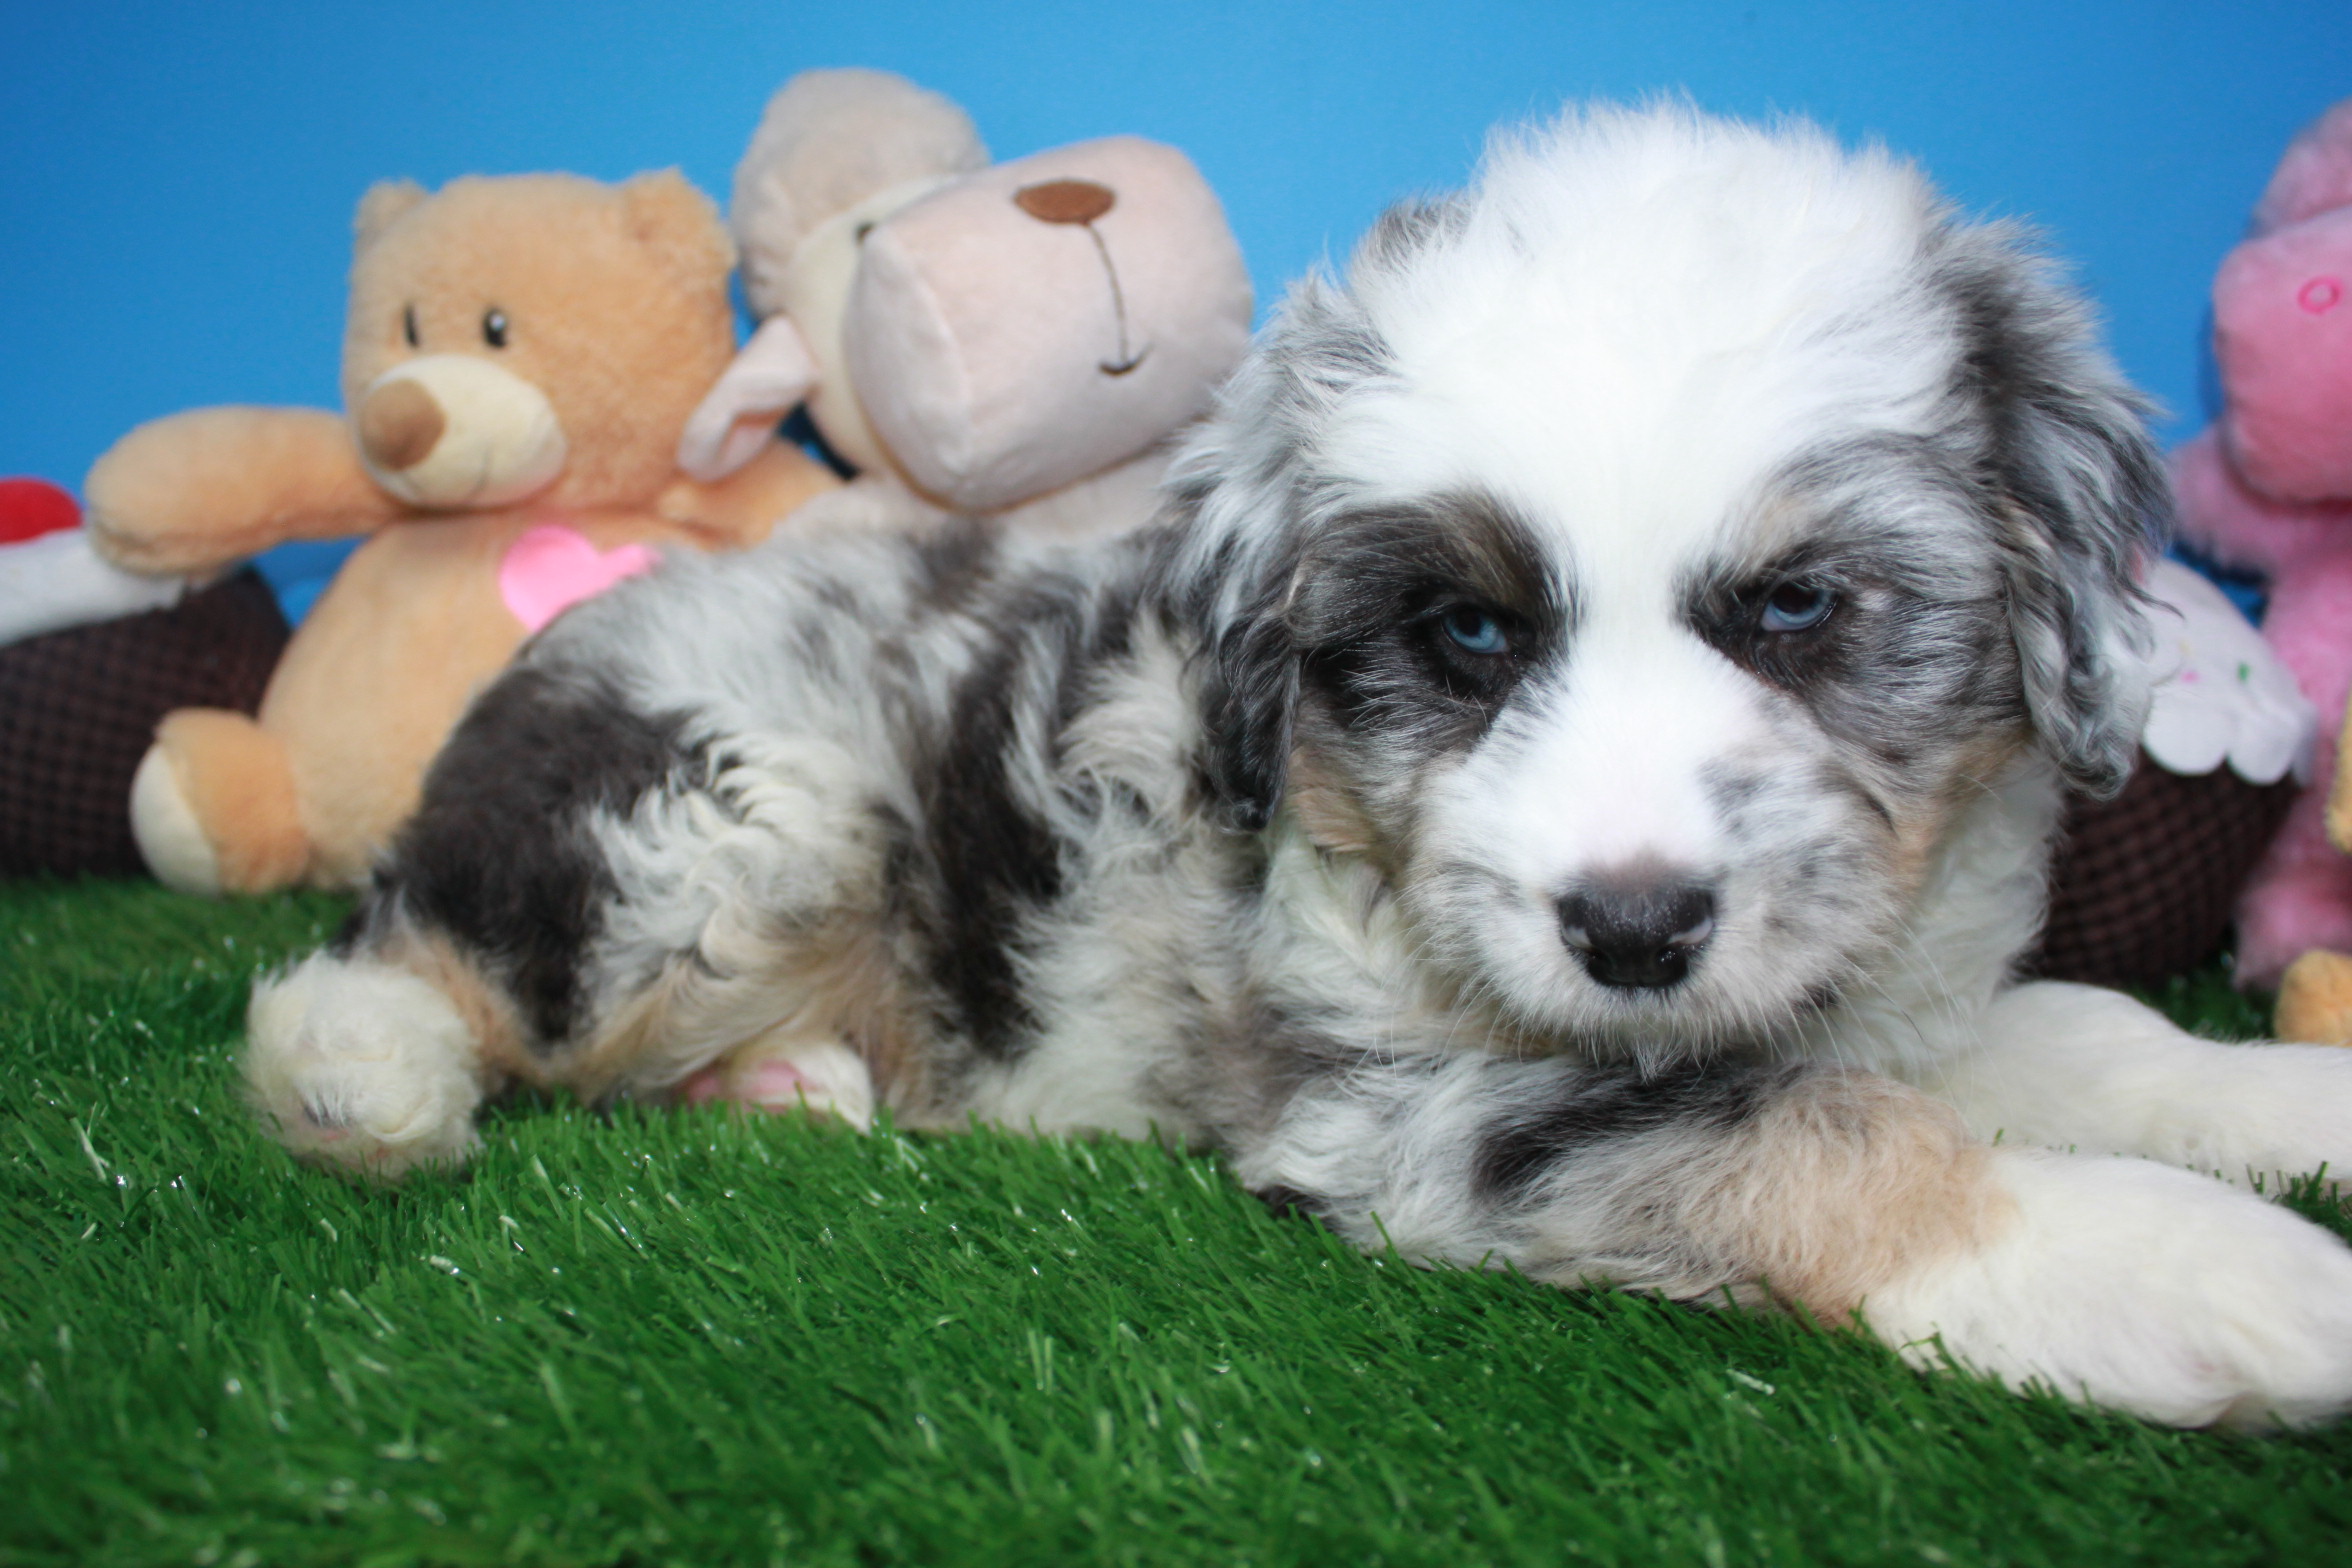 Mini AussieDoodle Puppies For Sale - Long Island Puppies